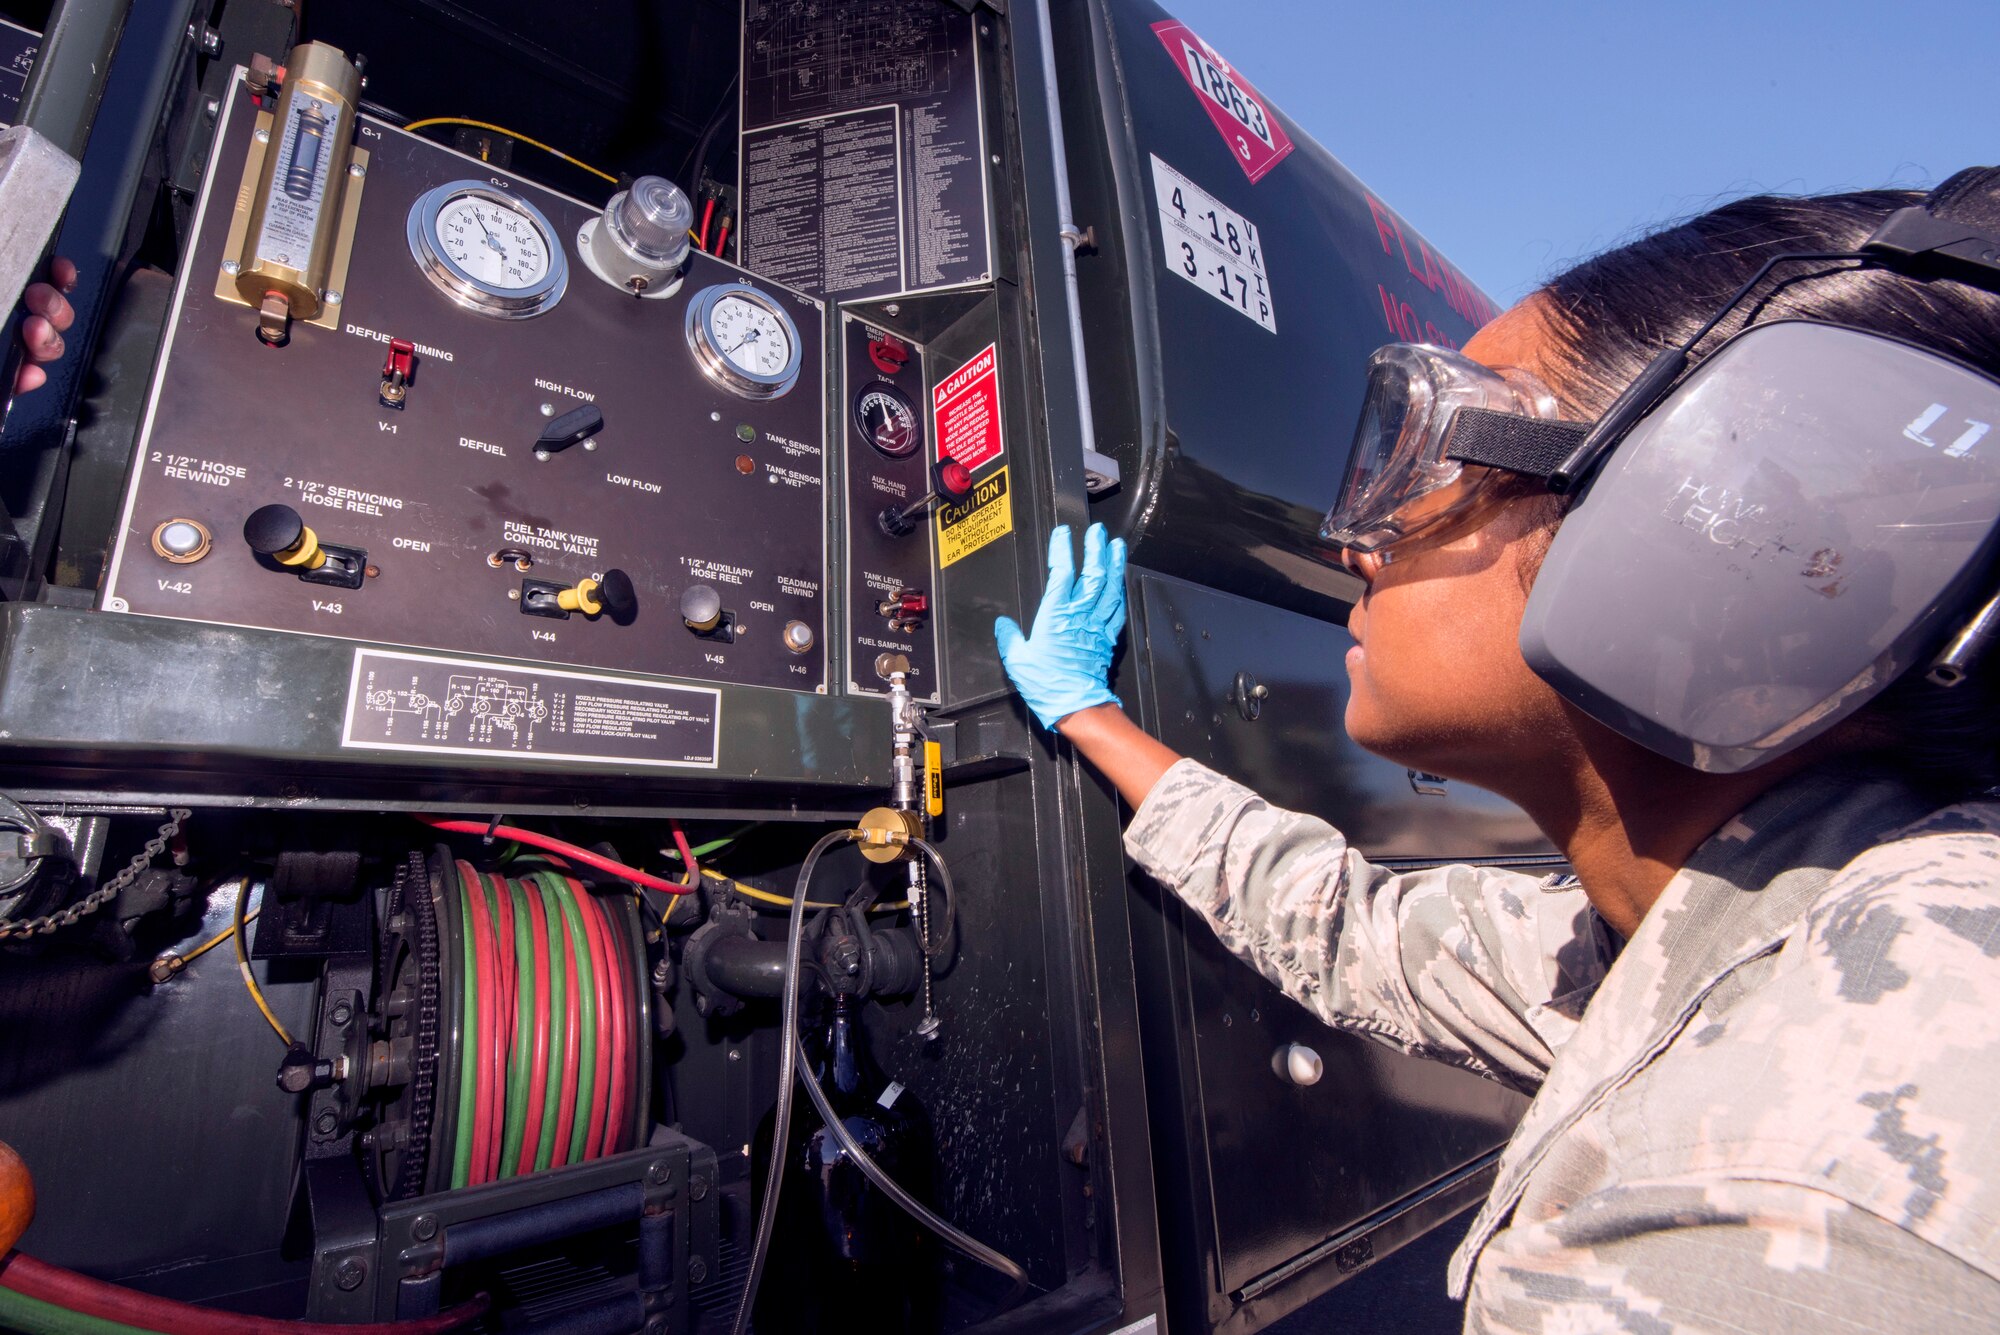 U.S. Air Force Staff Sgt. Akila Mohabir, the 6th Logistics Readiness Squadron fuels laboratory technician, withdraws fuel from a R-11 fuel truck at MacDill Air Force Base, Florida, March 14, 2019.